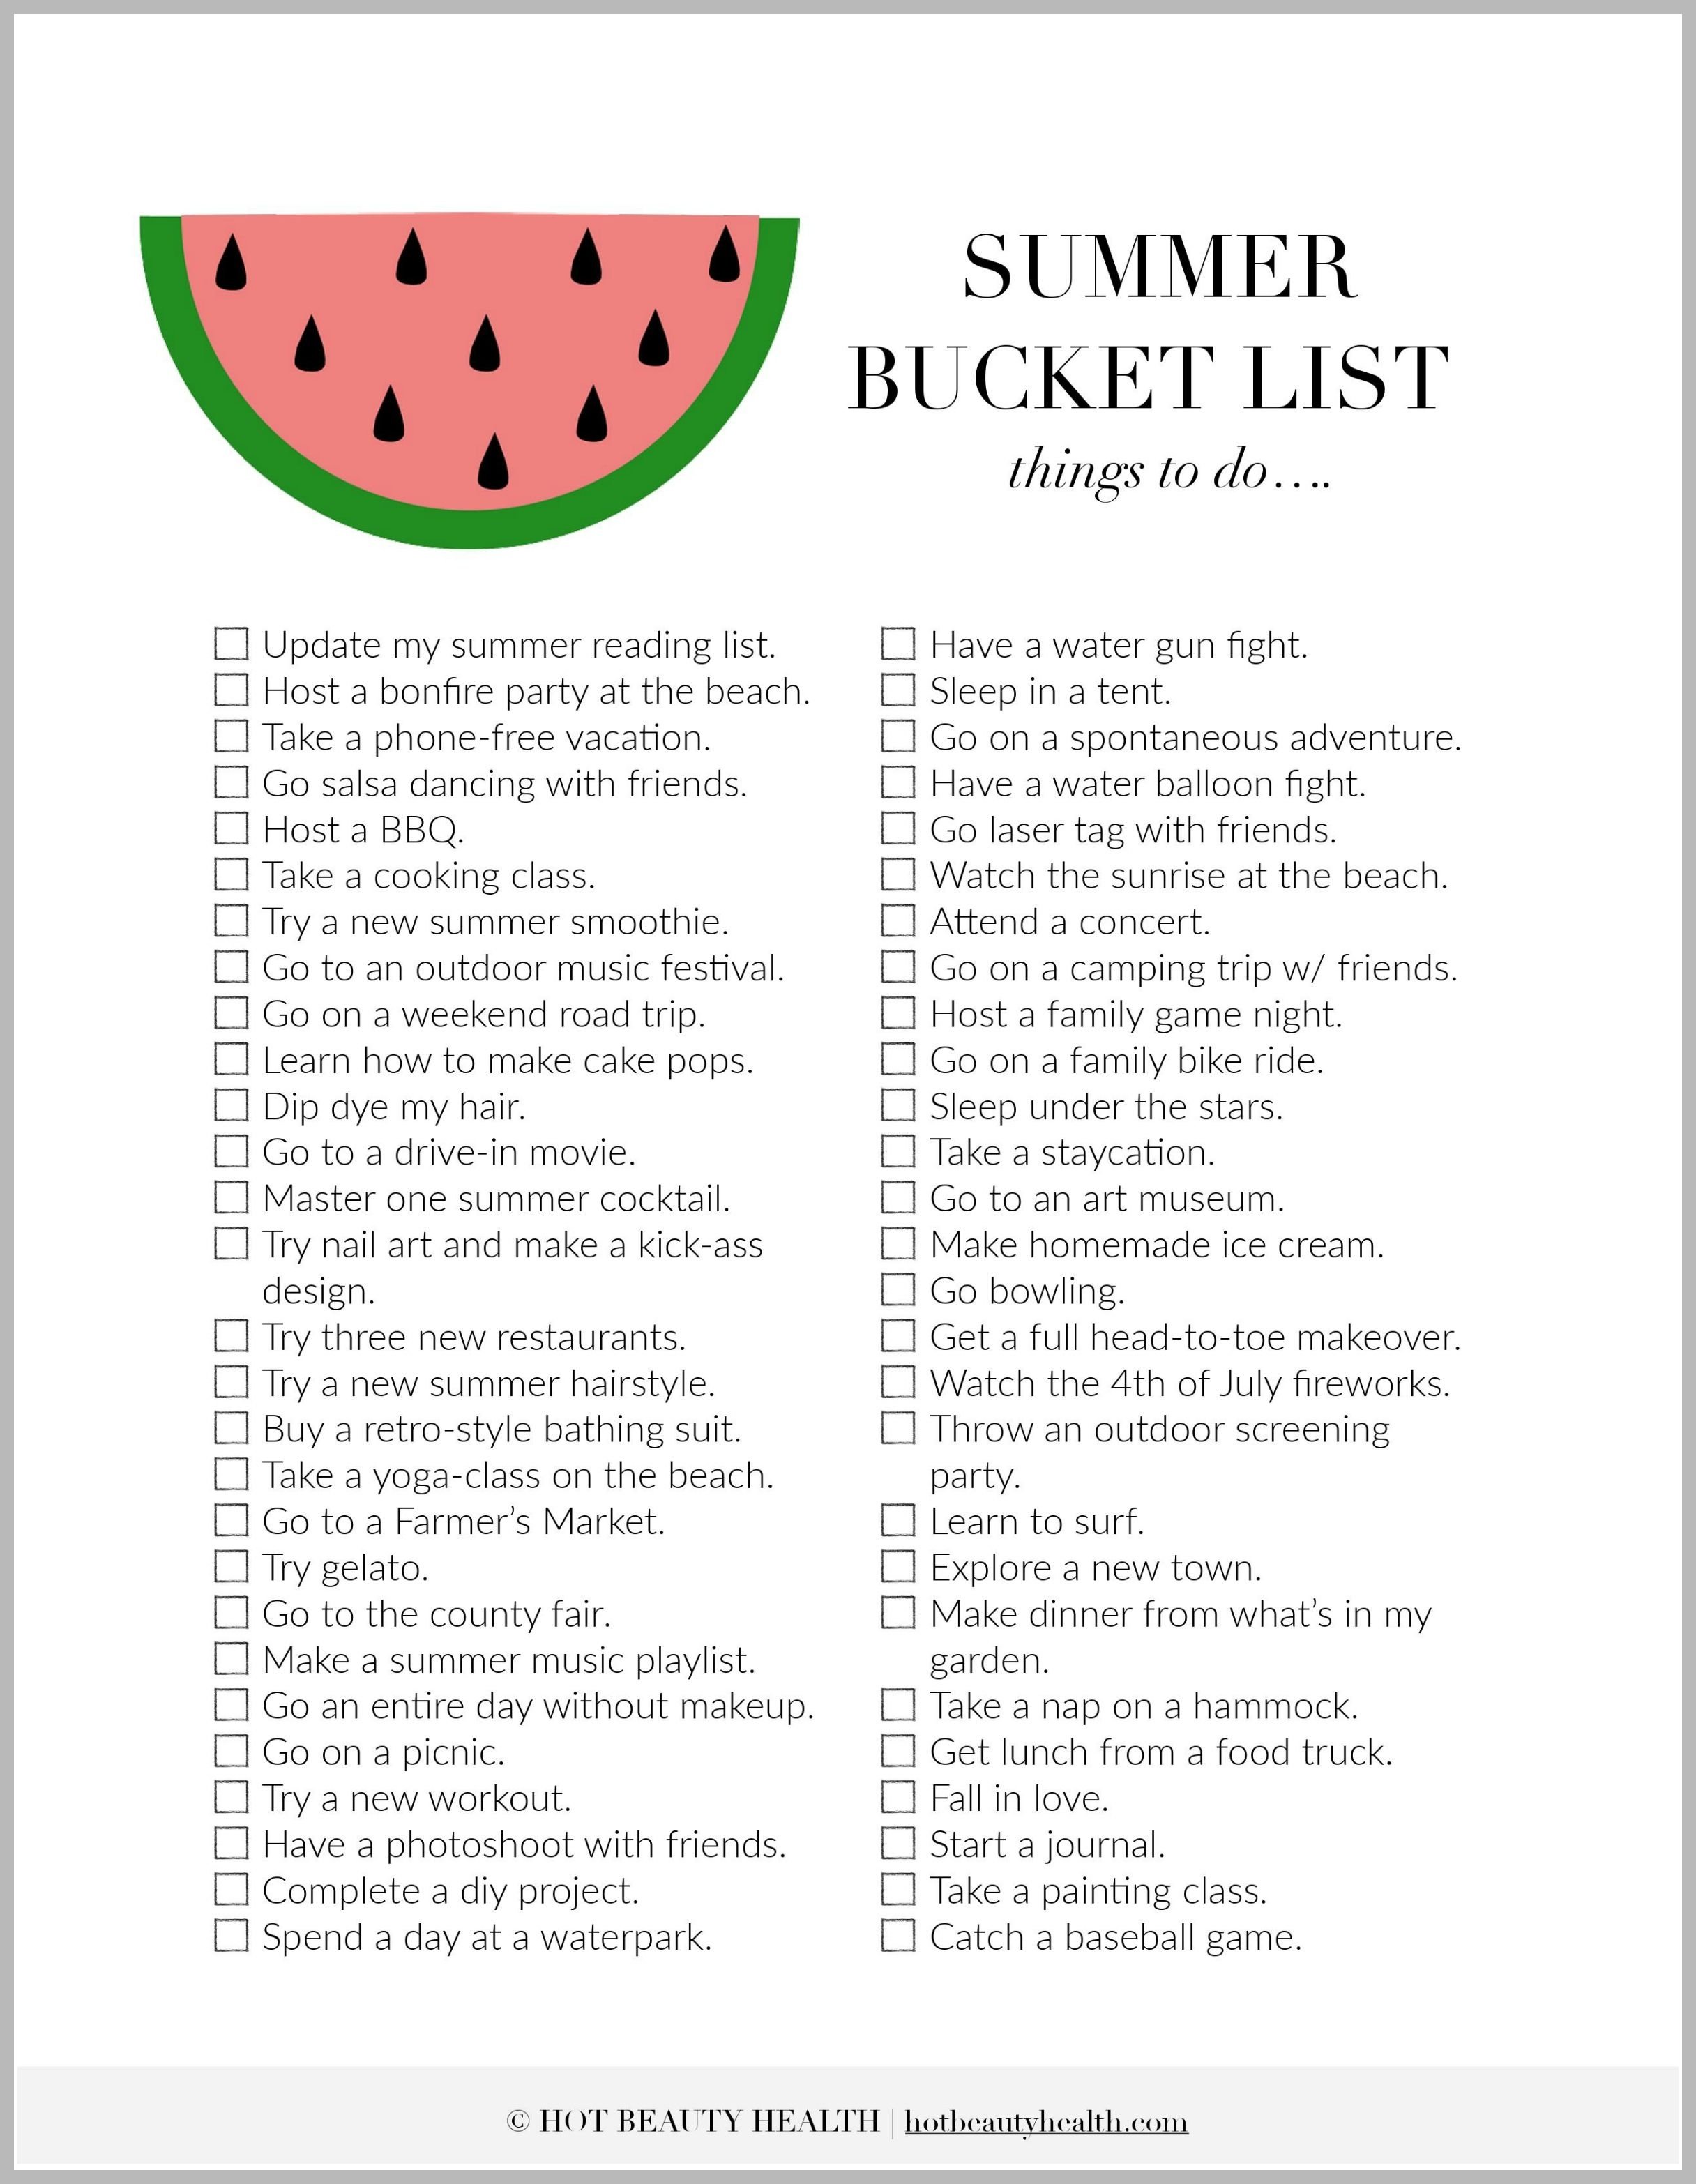 10 Fashionable Fun Ideas To Do With Friends summer bucket list ideas 30 things to do summer bucket lists 6 2023